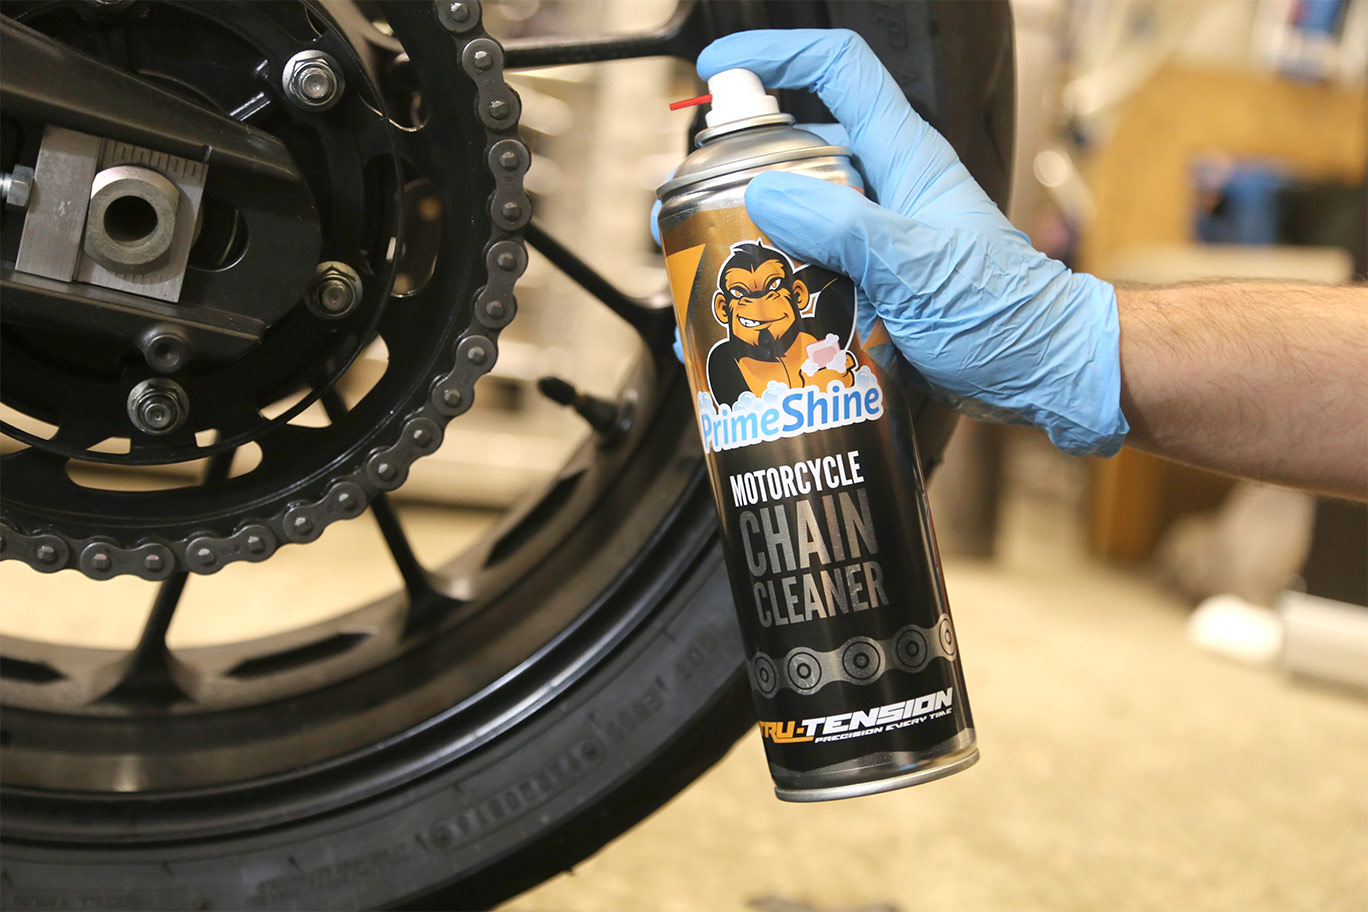 Best Products For Cleaning Your Motorbike's Chain